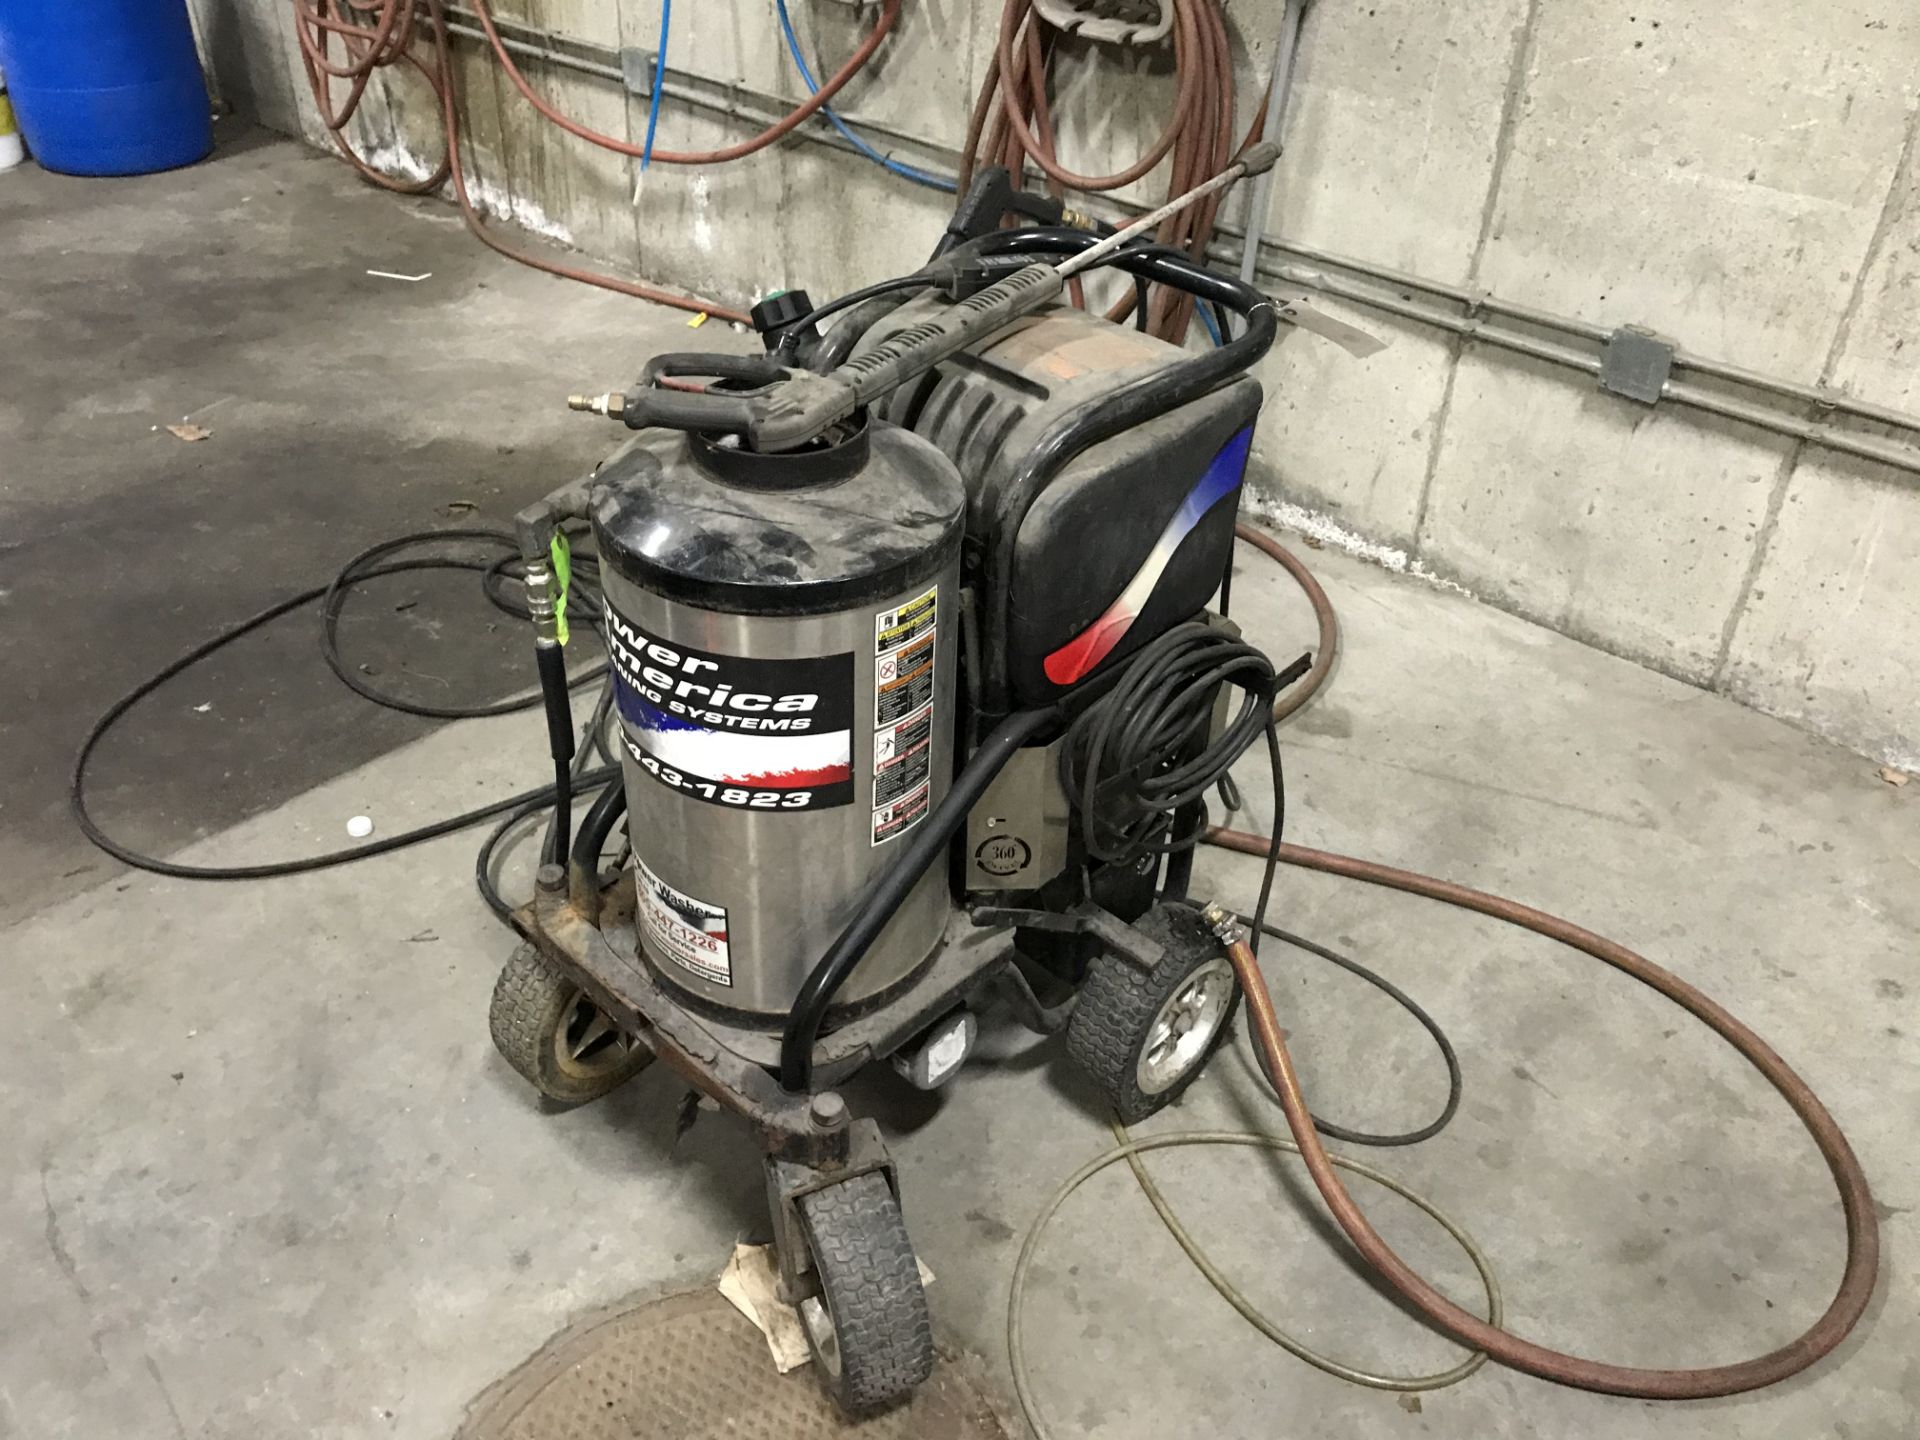 Power America Fuel Oil Powered Portable Pressure Washer w/Asst. Hoses & Wands